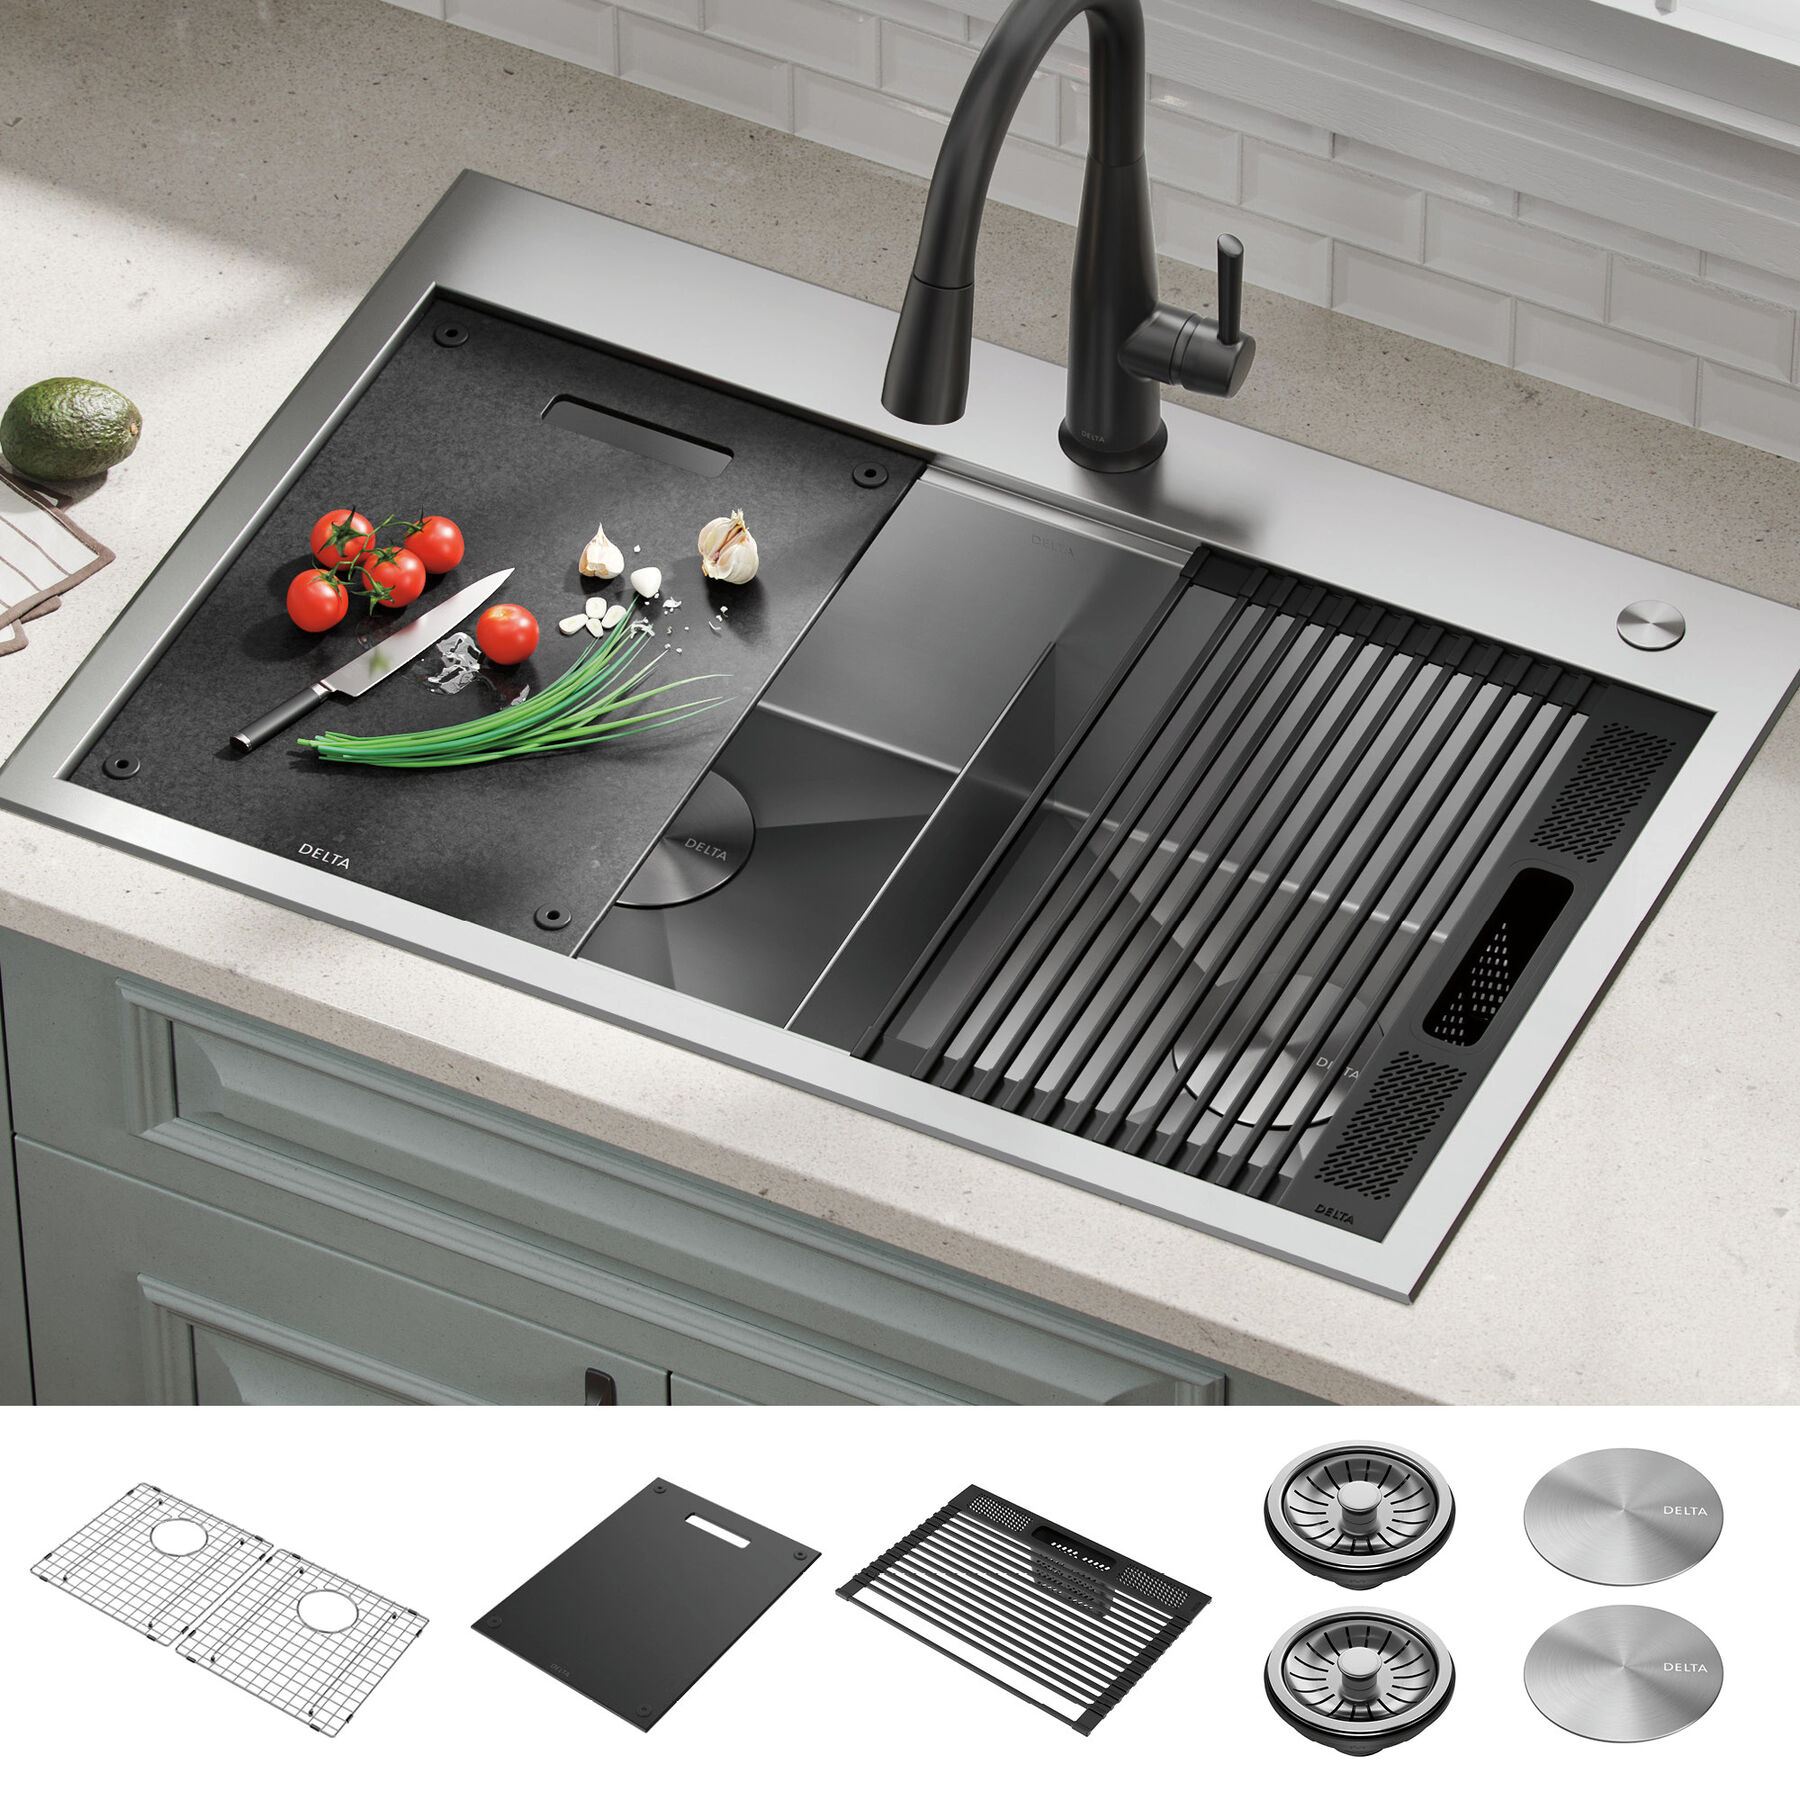 32” Workstation Kitchen Sink Undermount 16 Gauge Stainless Steel Single  Bowl with WorkFlow™ Ledge and Accessories in Stainless Steel 95B931-32S-SS